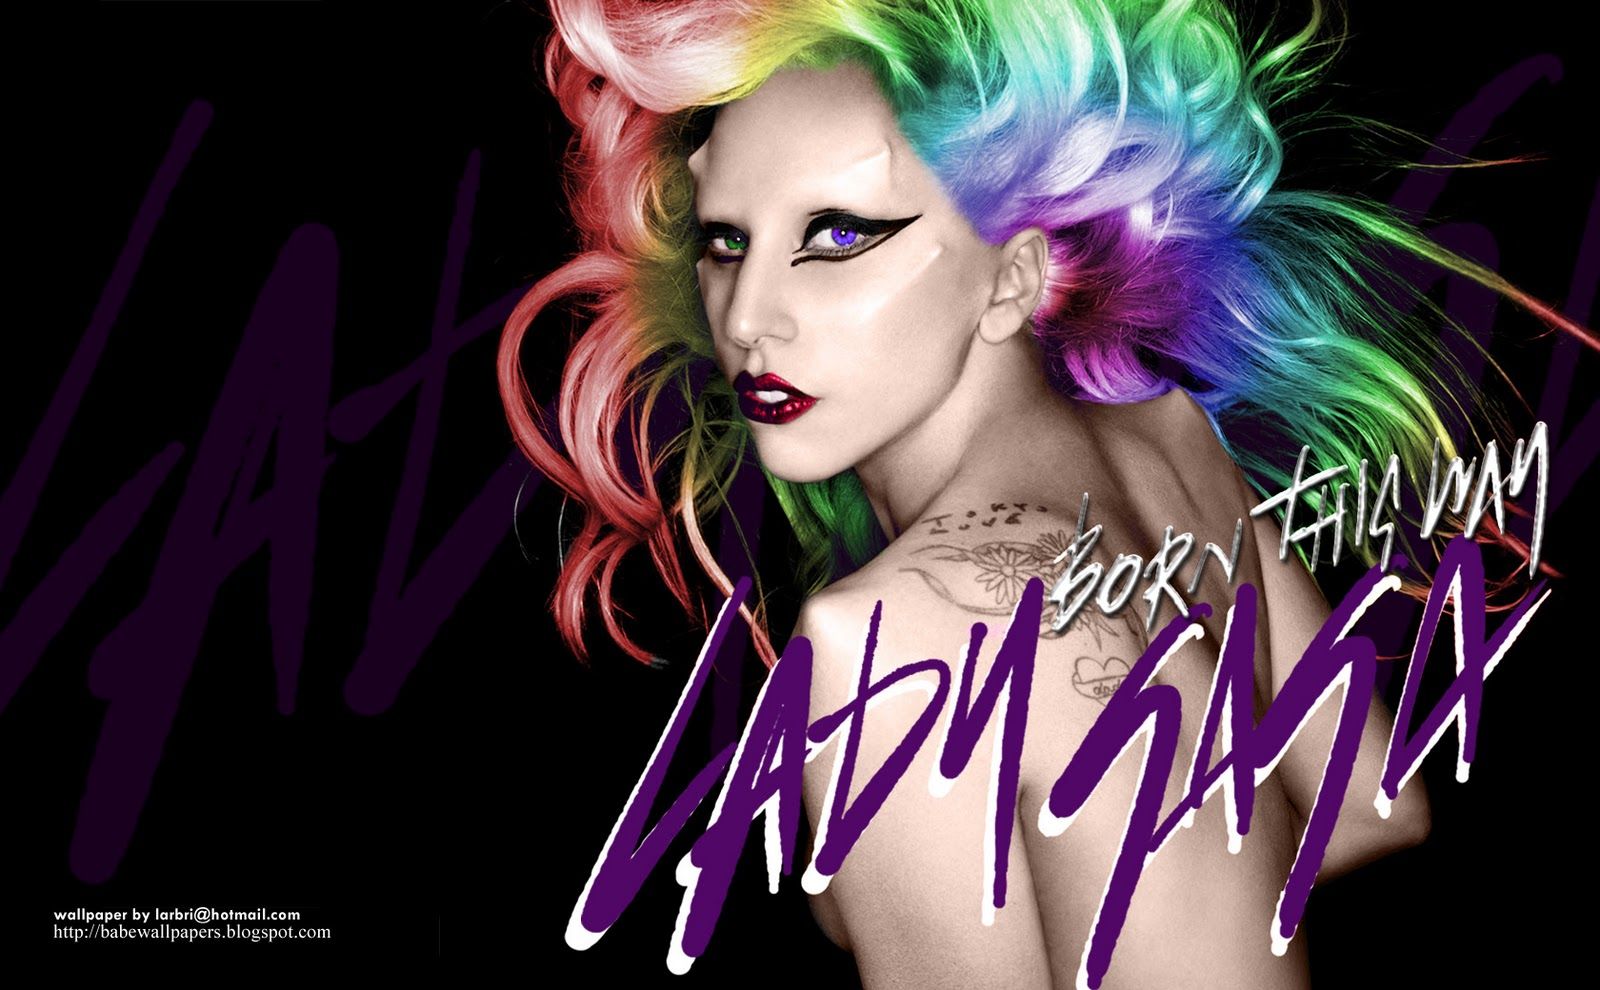 Free download lady gaga born this way wallpaper [1600x990] for your Desktop, Mobile & Tablet. Explore Lady Gaga Wallpaper. Lady Gaga Wallpaper, Lady Gaga Wallpaper, Lady Gaga Desktop Wallpaper